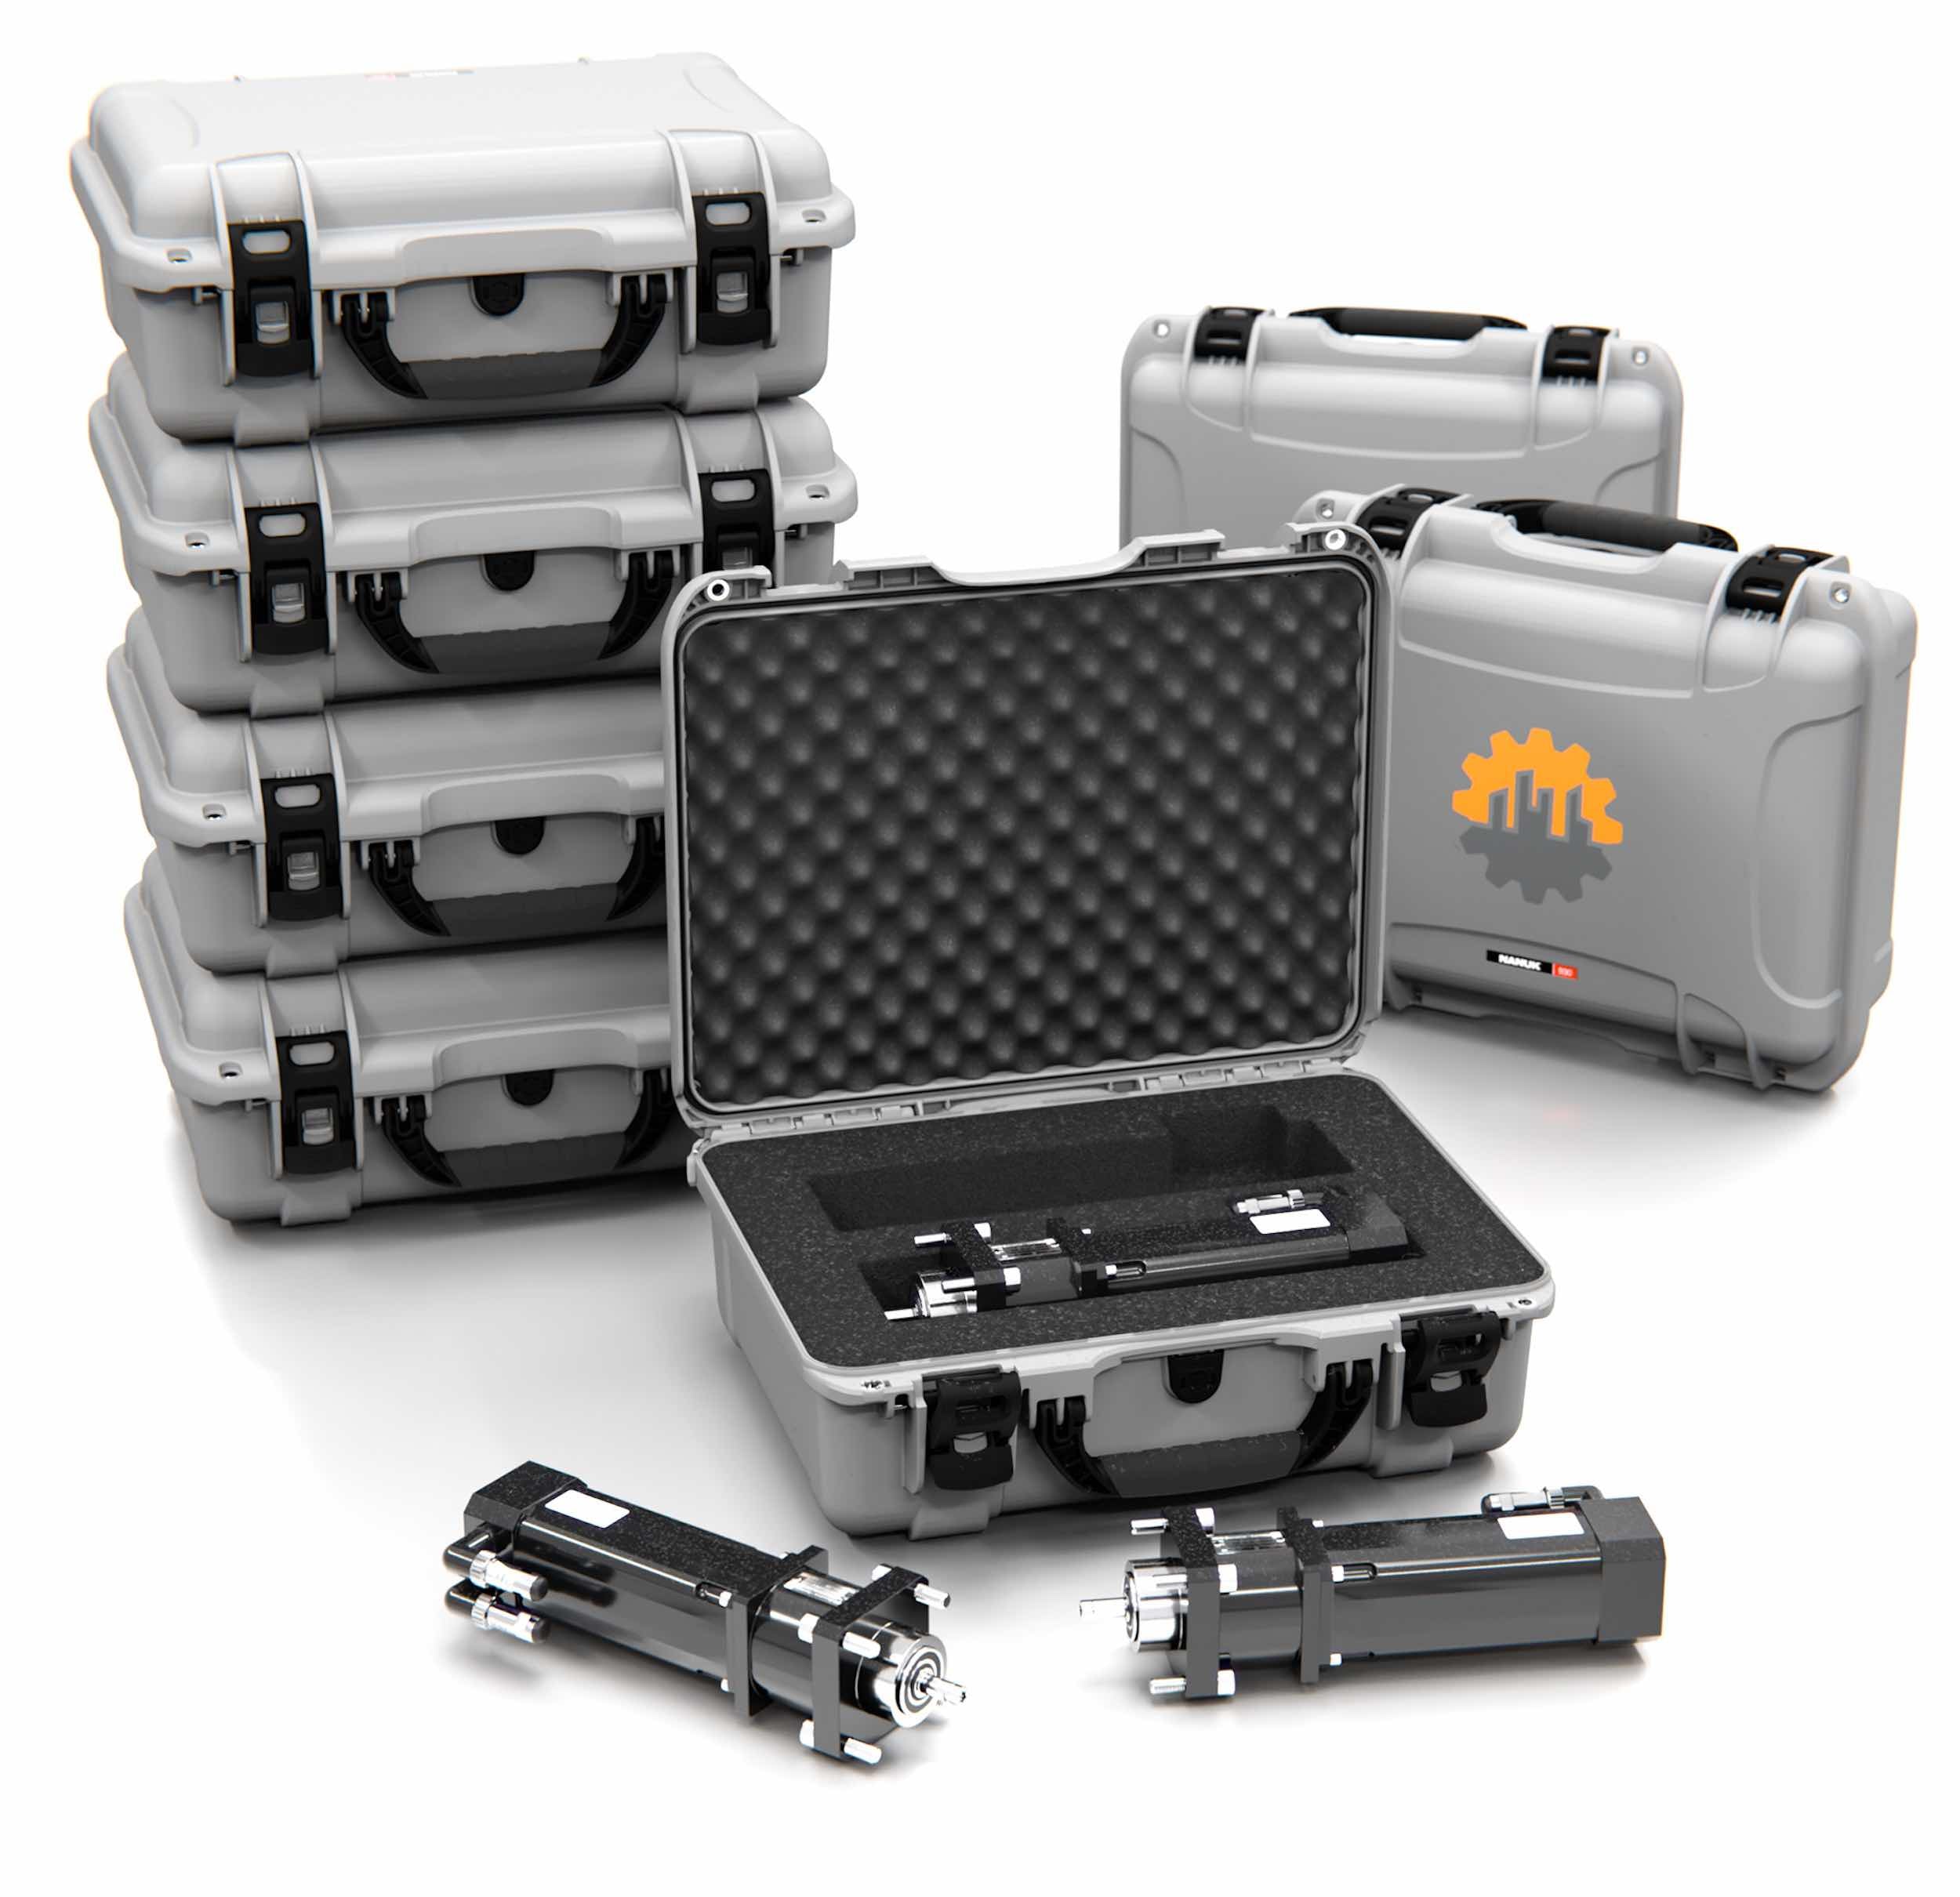 Stack of NANUK hard cases with gear inside, showcasing durable protection for business equipment